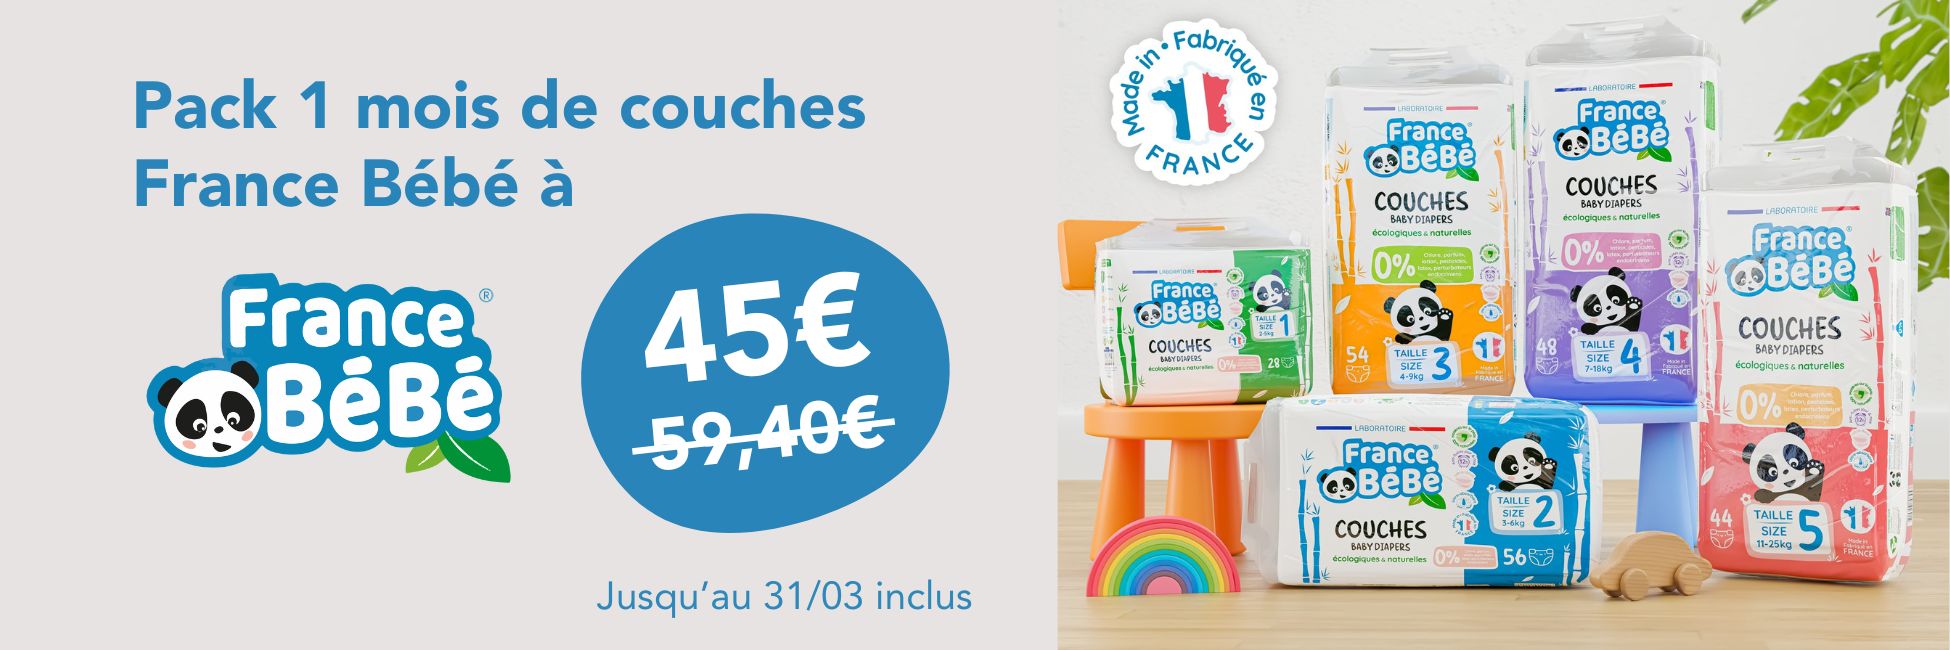 FRANCE BEBE Couches Pack 1 mois